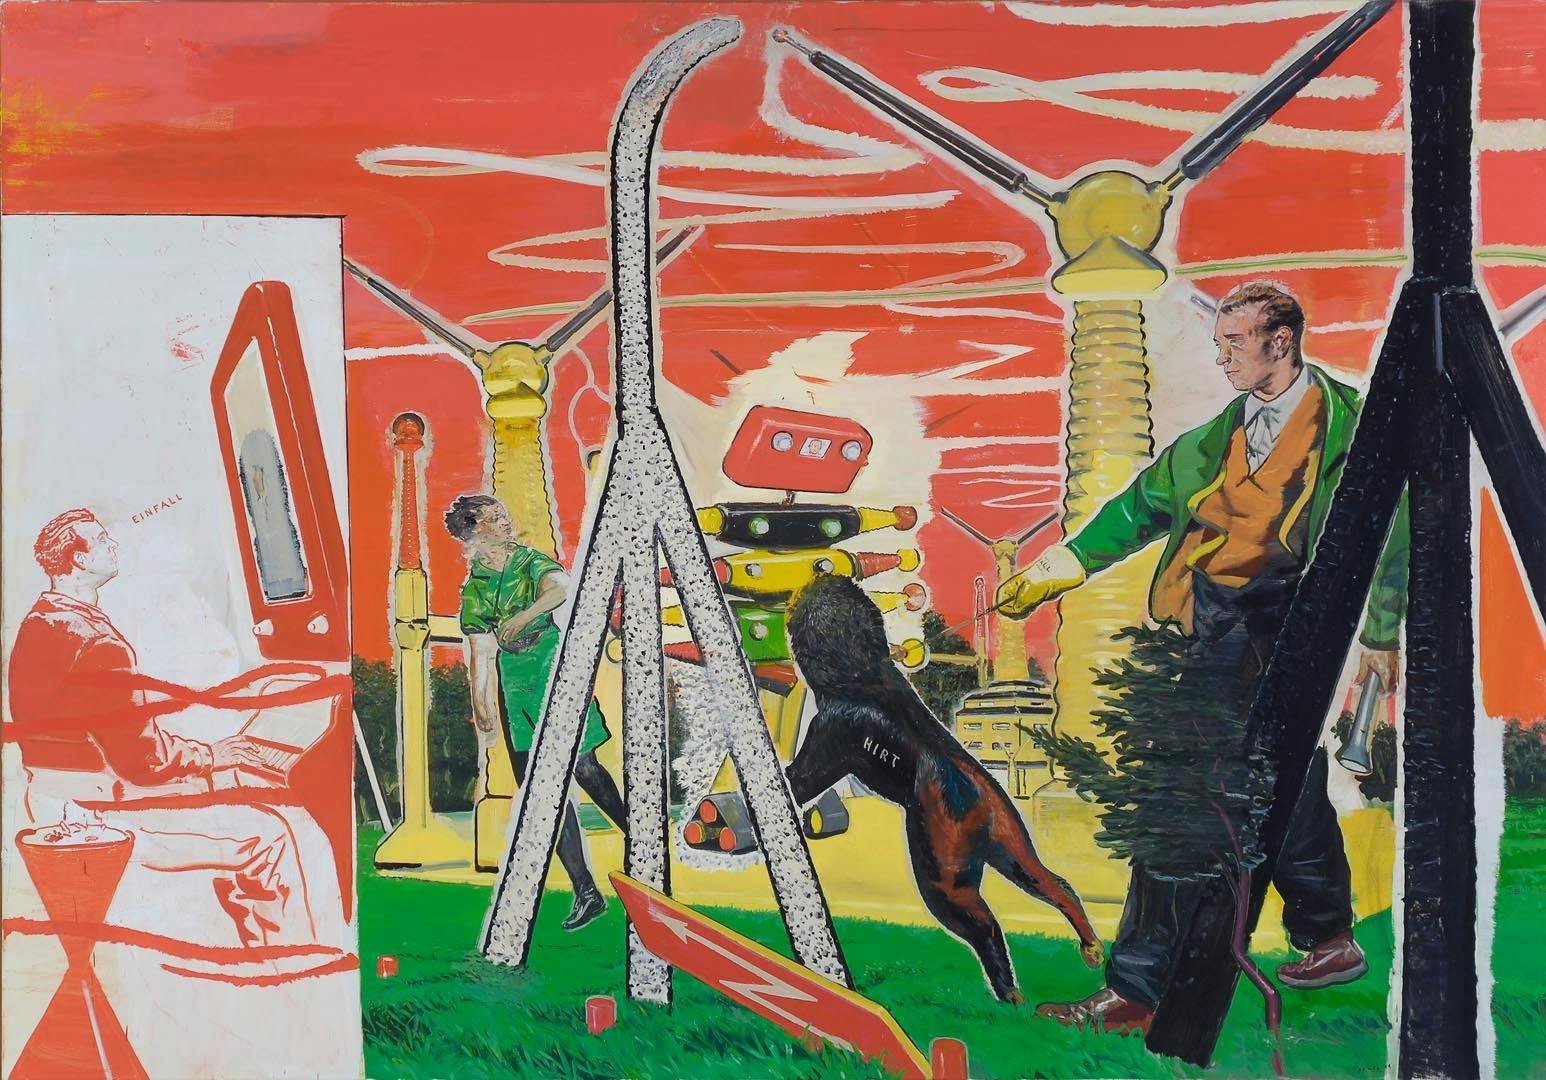 A painting by Neo Rauch, titled Einfall, dated 2001.